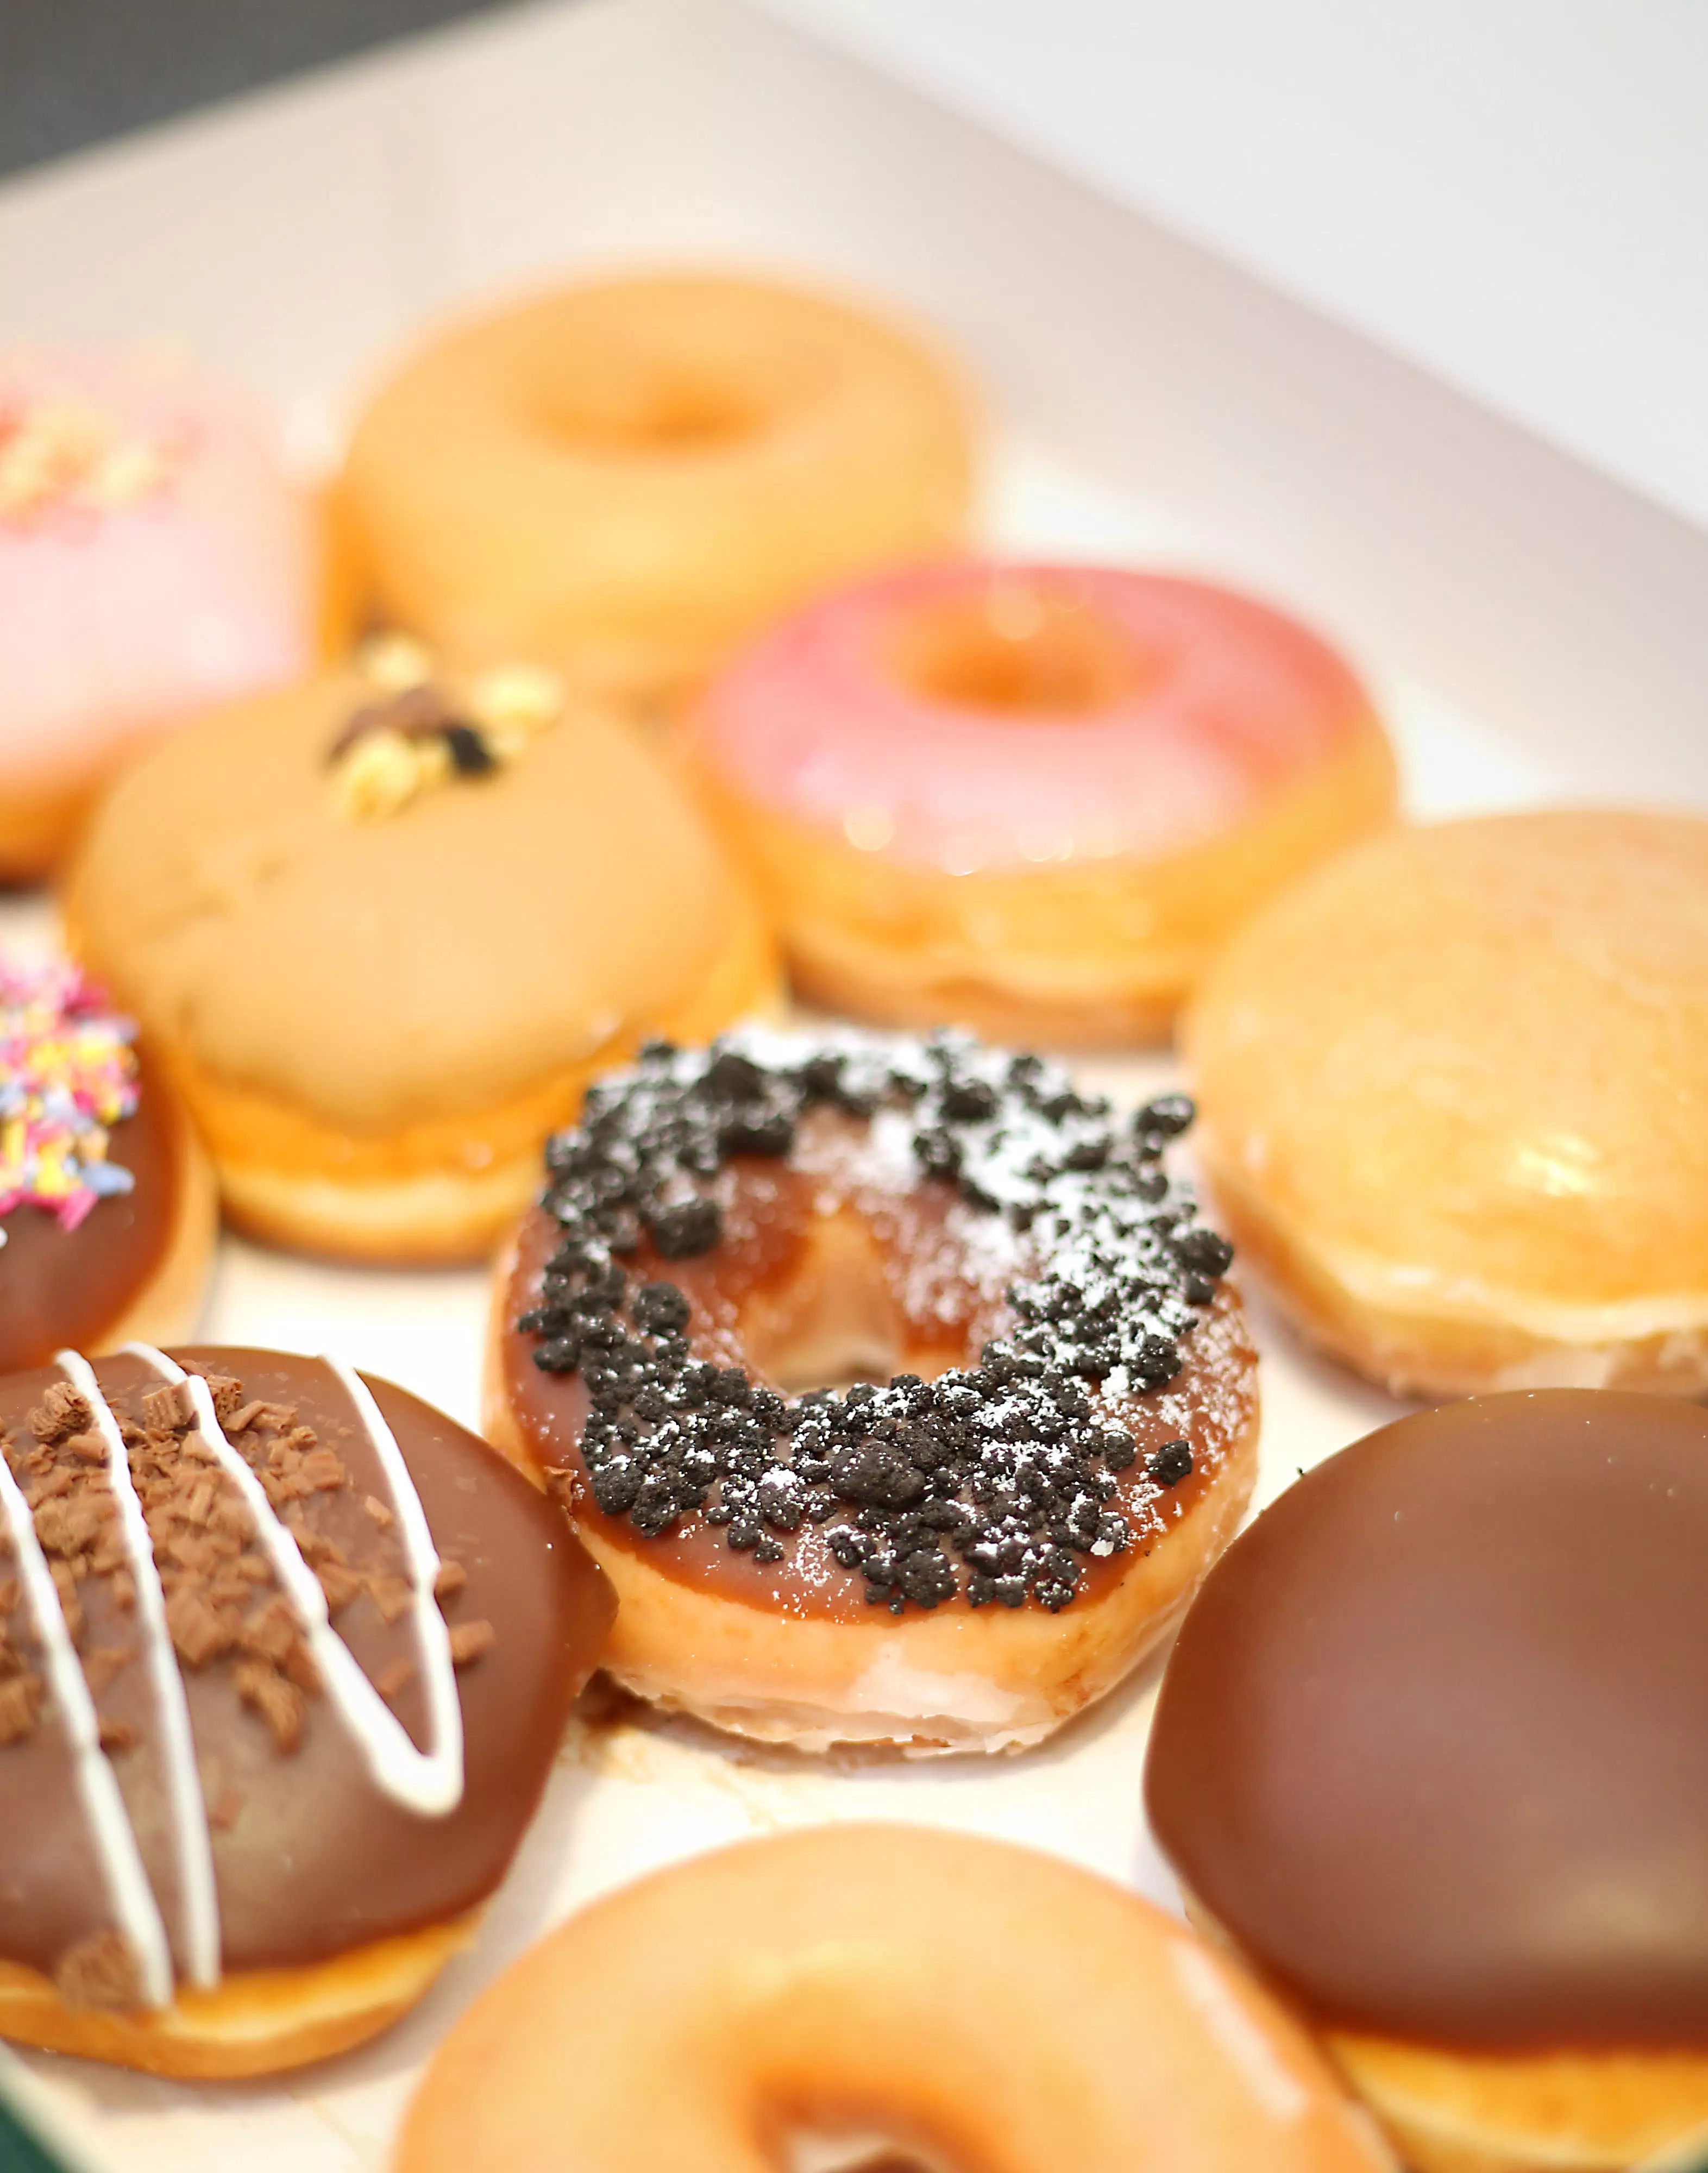 PC Simon Read reportedly tried to get a box of Krispy Kreme doughnuts for just 7p.